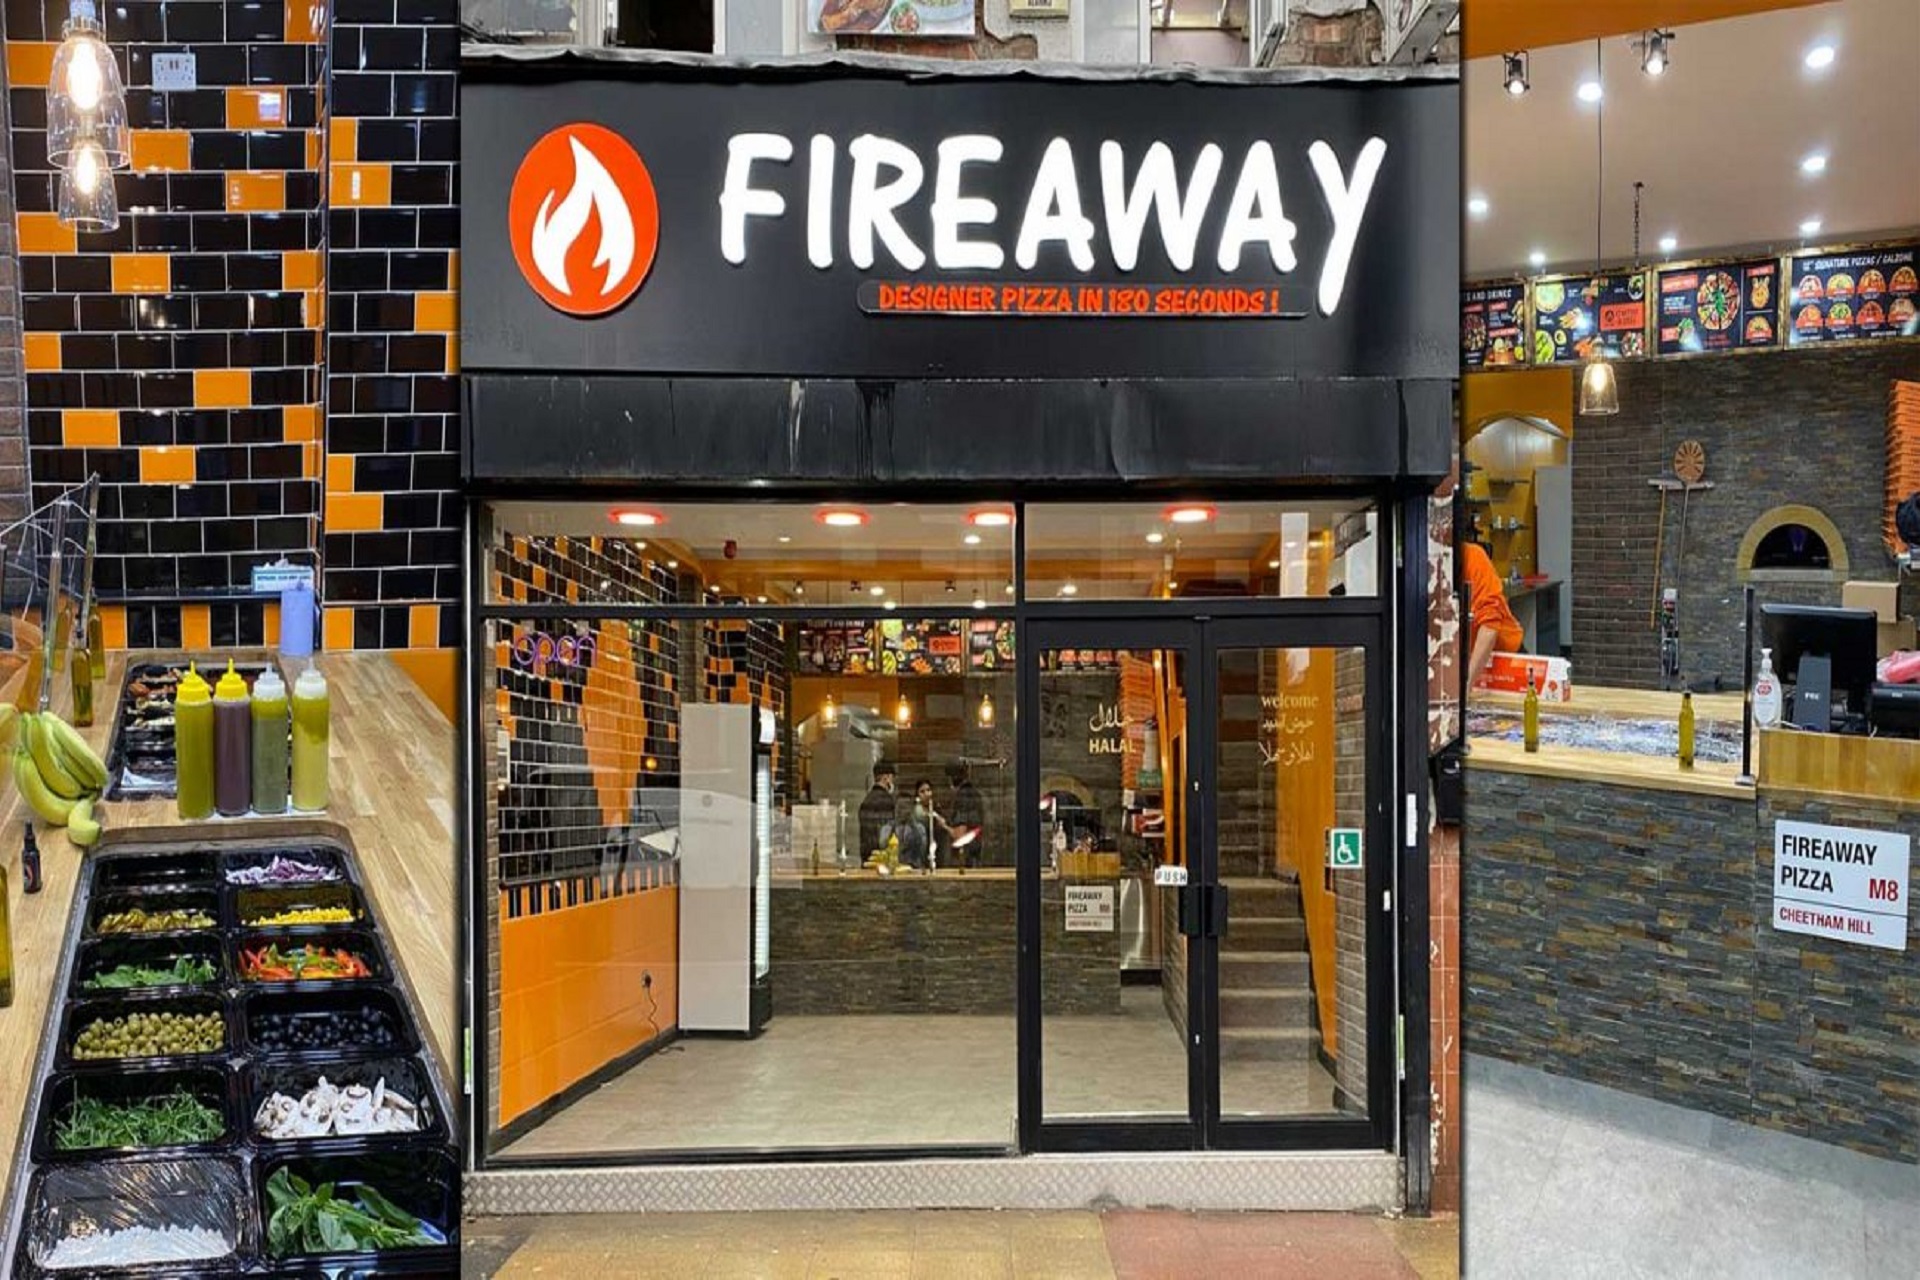 Getting a pizza the action! Fireaway Pizza CEO and founder Mario Aleppo's determination and drive takes the chain to dizzying heights as a £19m fast food franchise